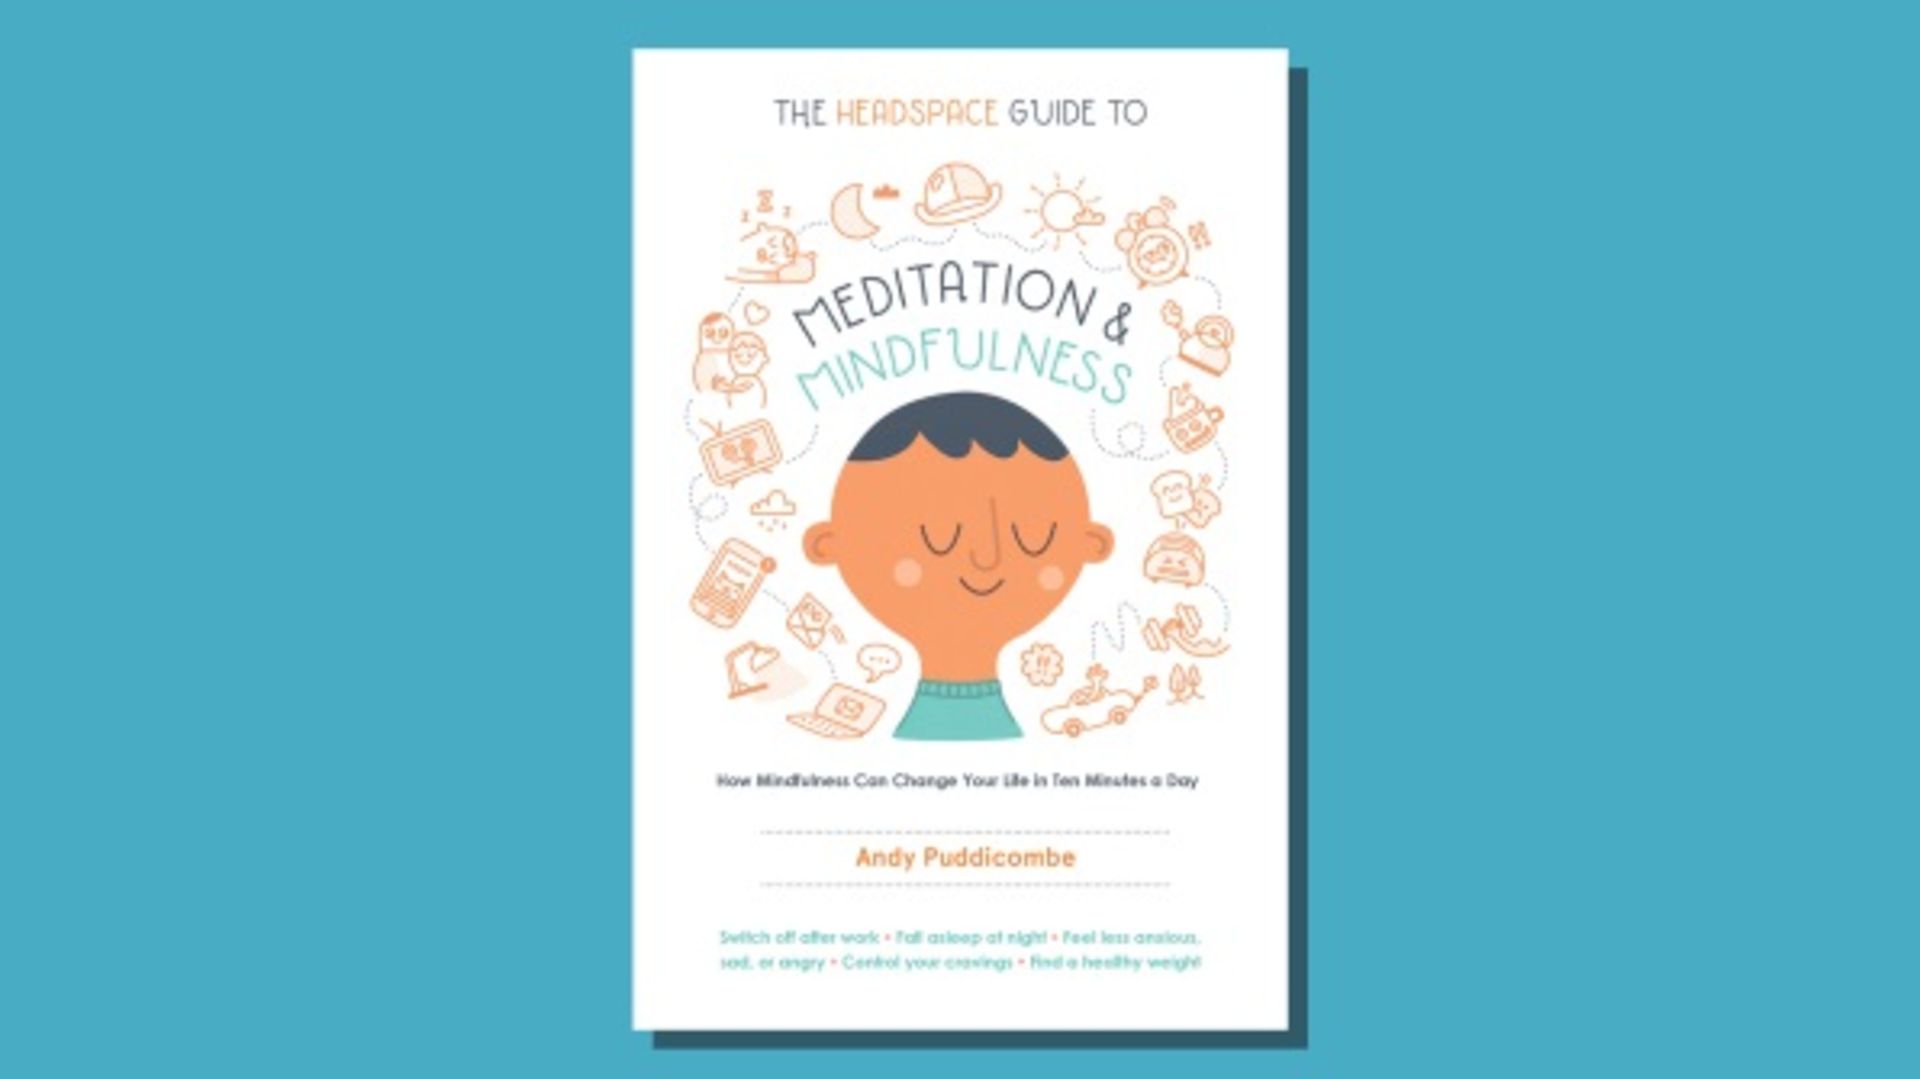 The Headspace Guide to Meditation and Mindfulness, by Andy Puddicombe